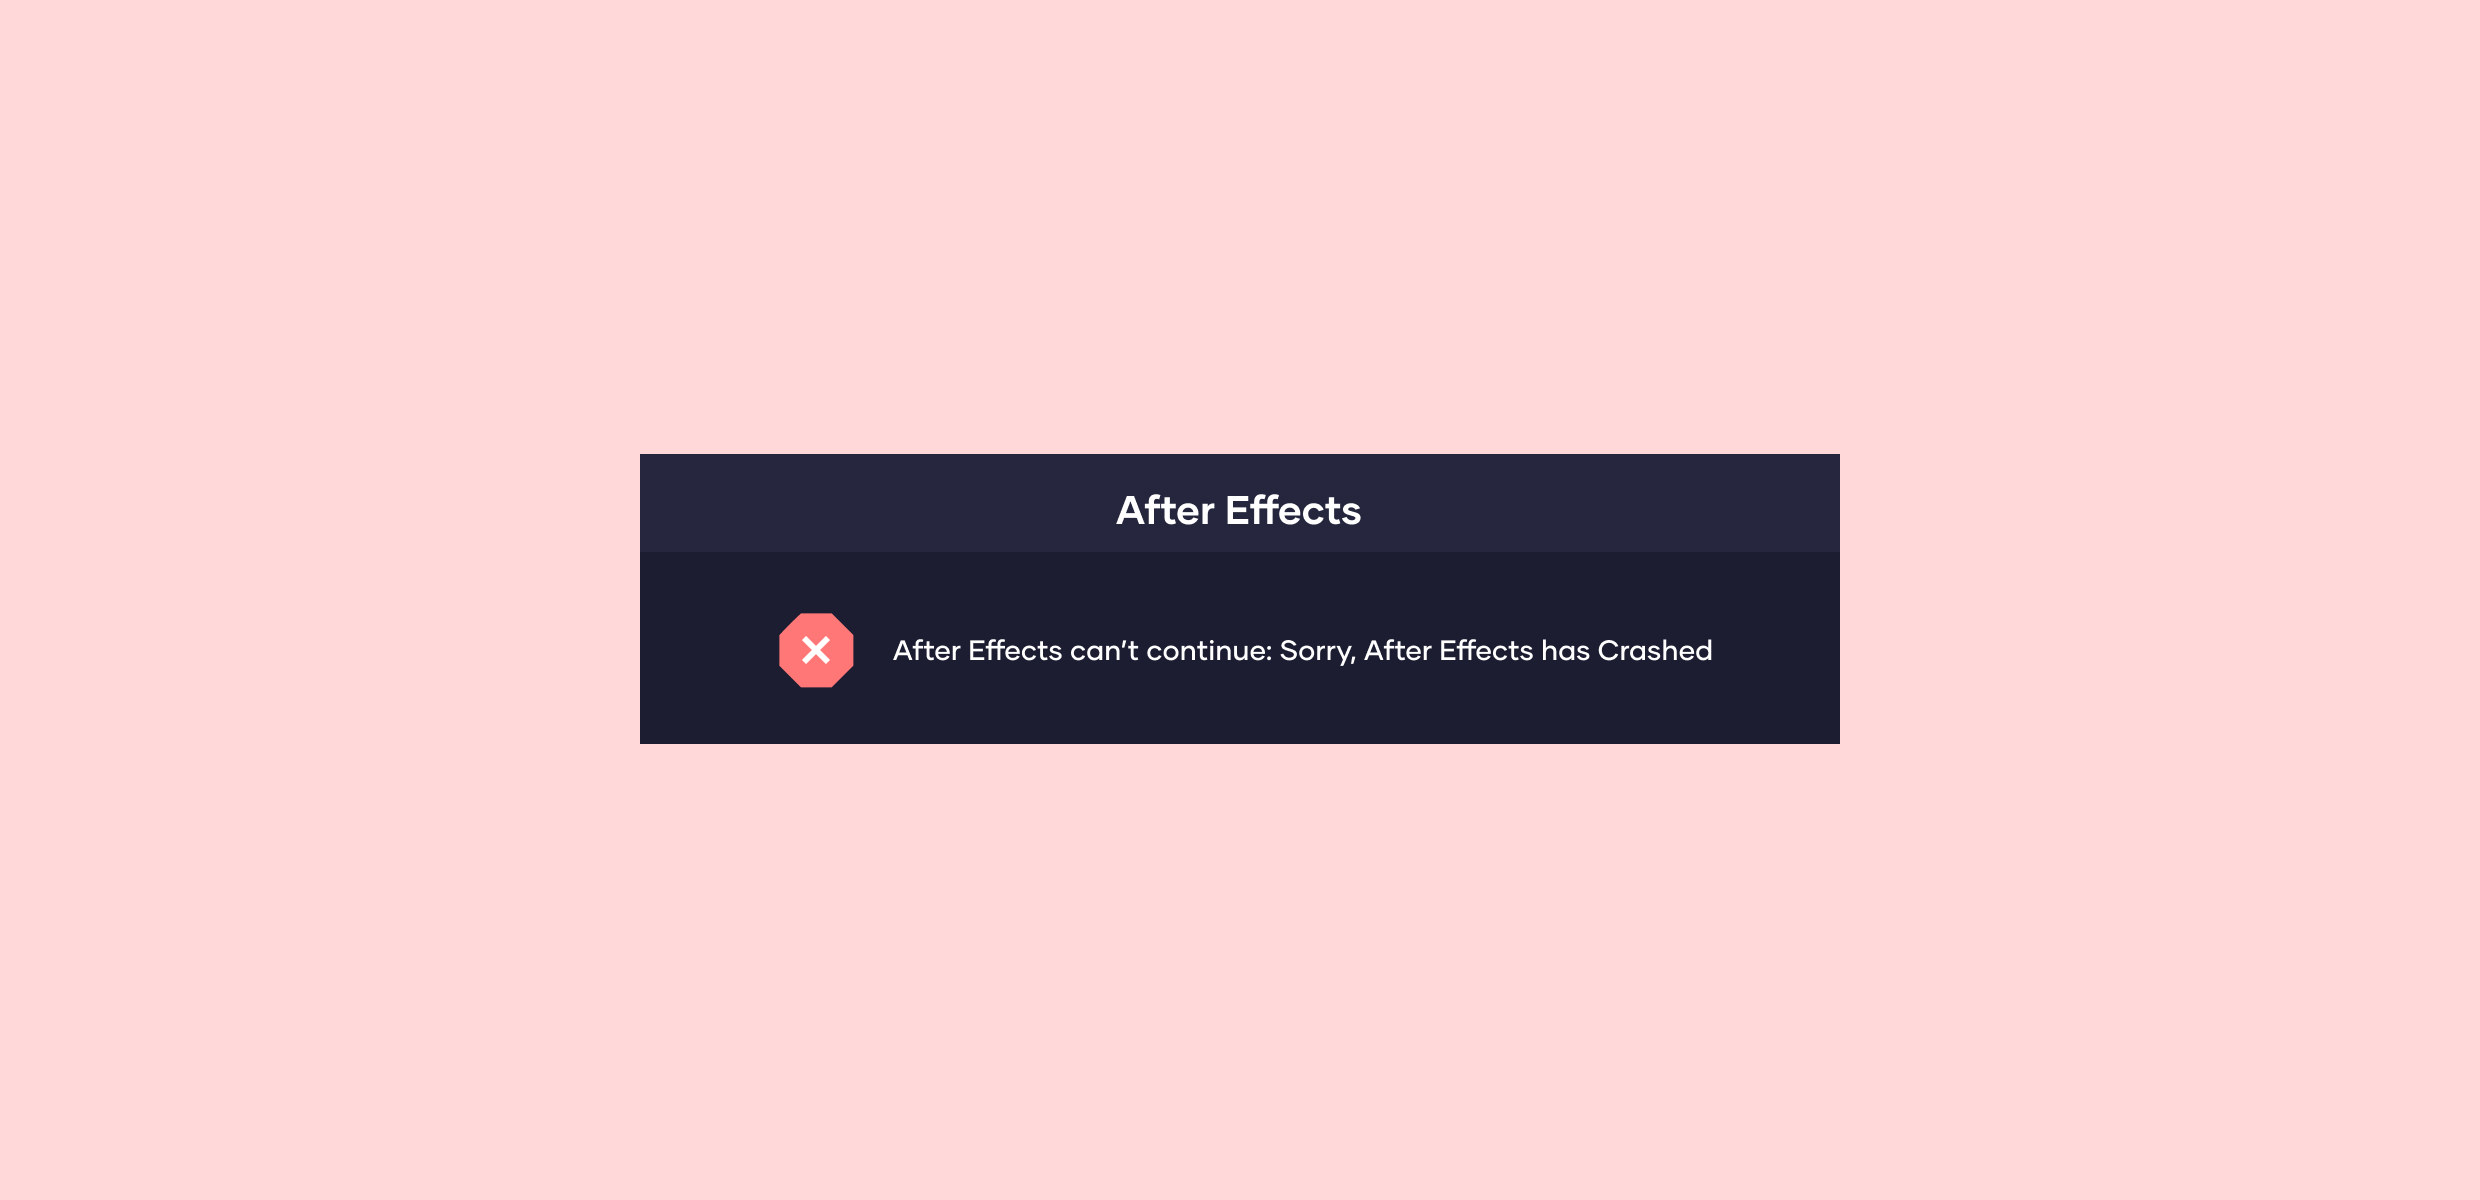 How To Stop After Effects From Crashing